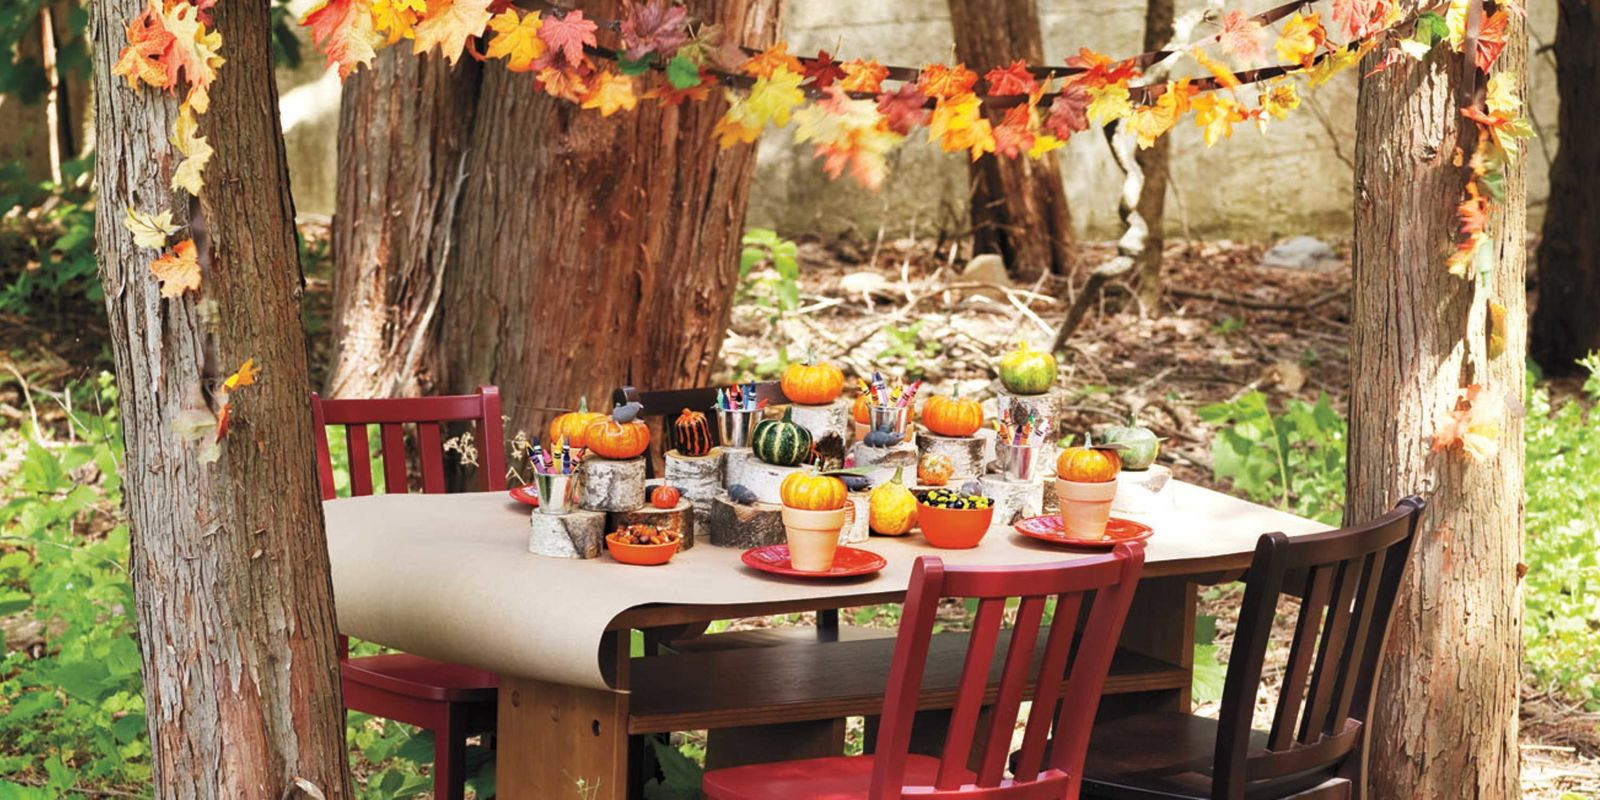 Backyard Fall Party Ideas
 13 Fall Harvest Party Ideas for Kids Autumn Party Food